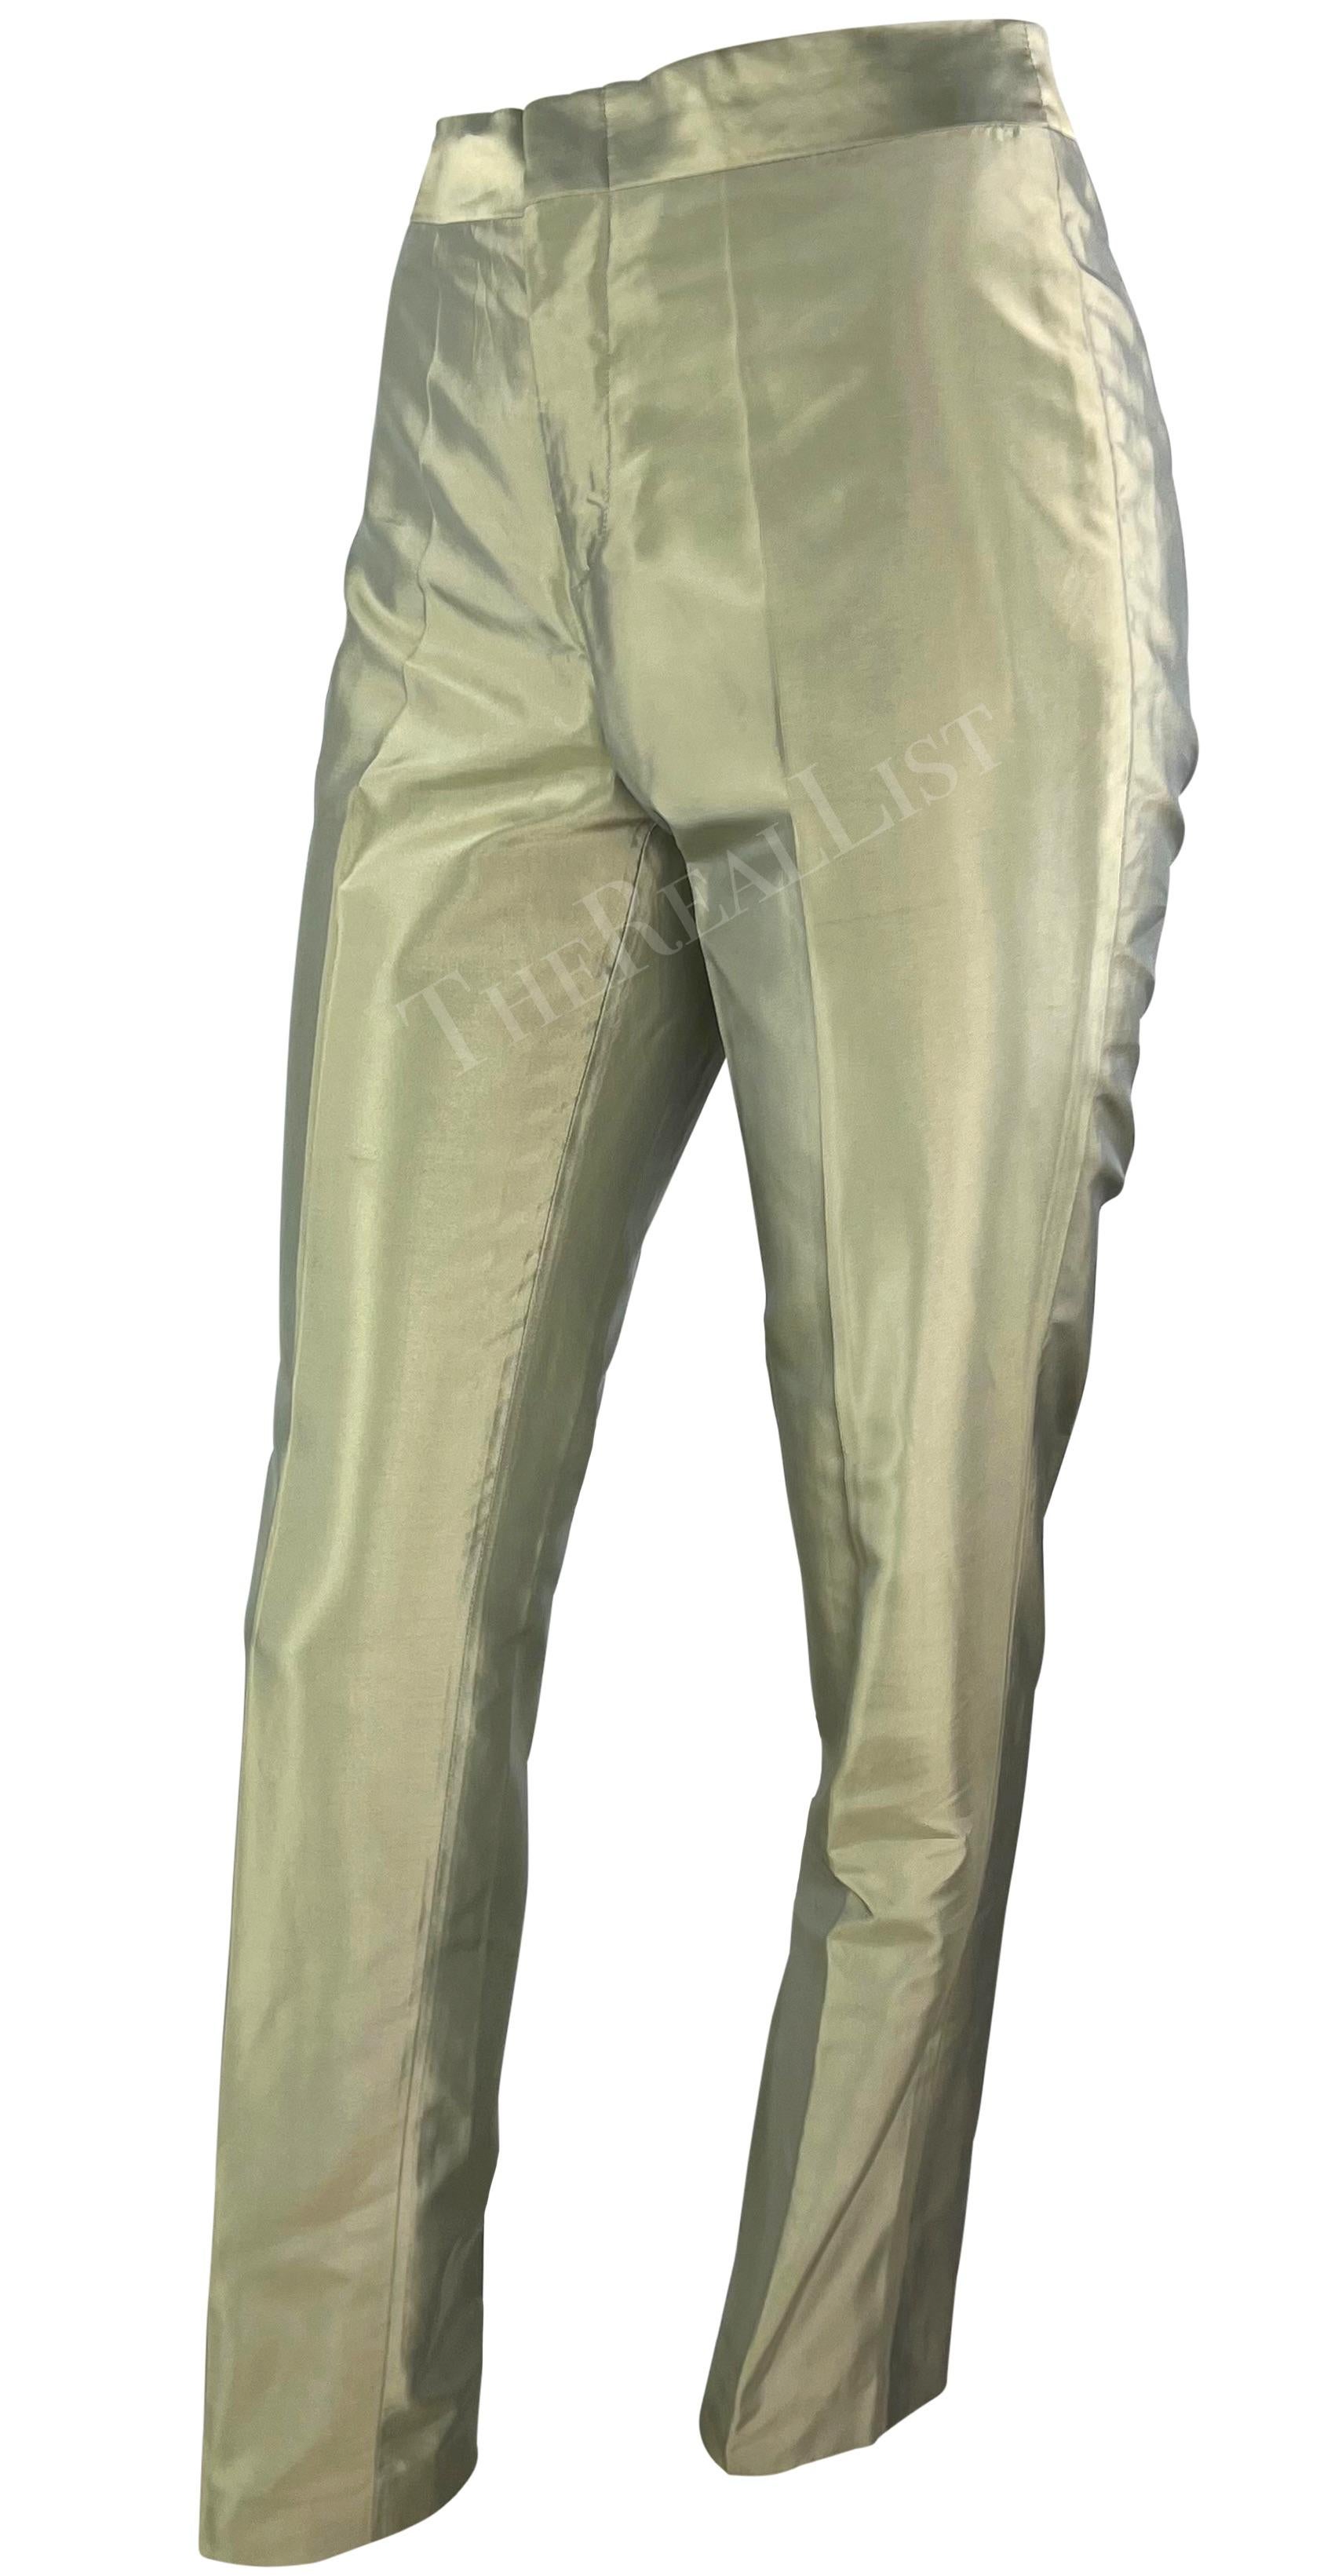 Presenting a pair of light green iridescent Gucci pants, designed by Tom Ford. From the Spring/Summer 2000 collection, these pants are constructed entirely of light green shimmering iridescent silk. Made complete with a high waist and pleats, these